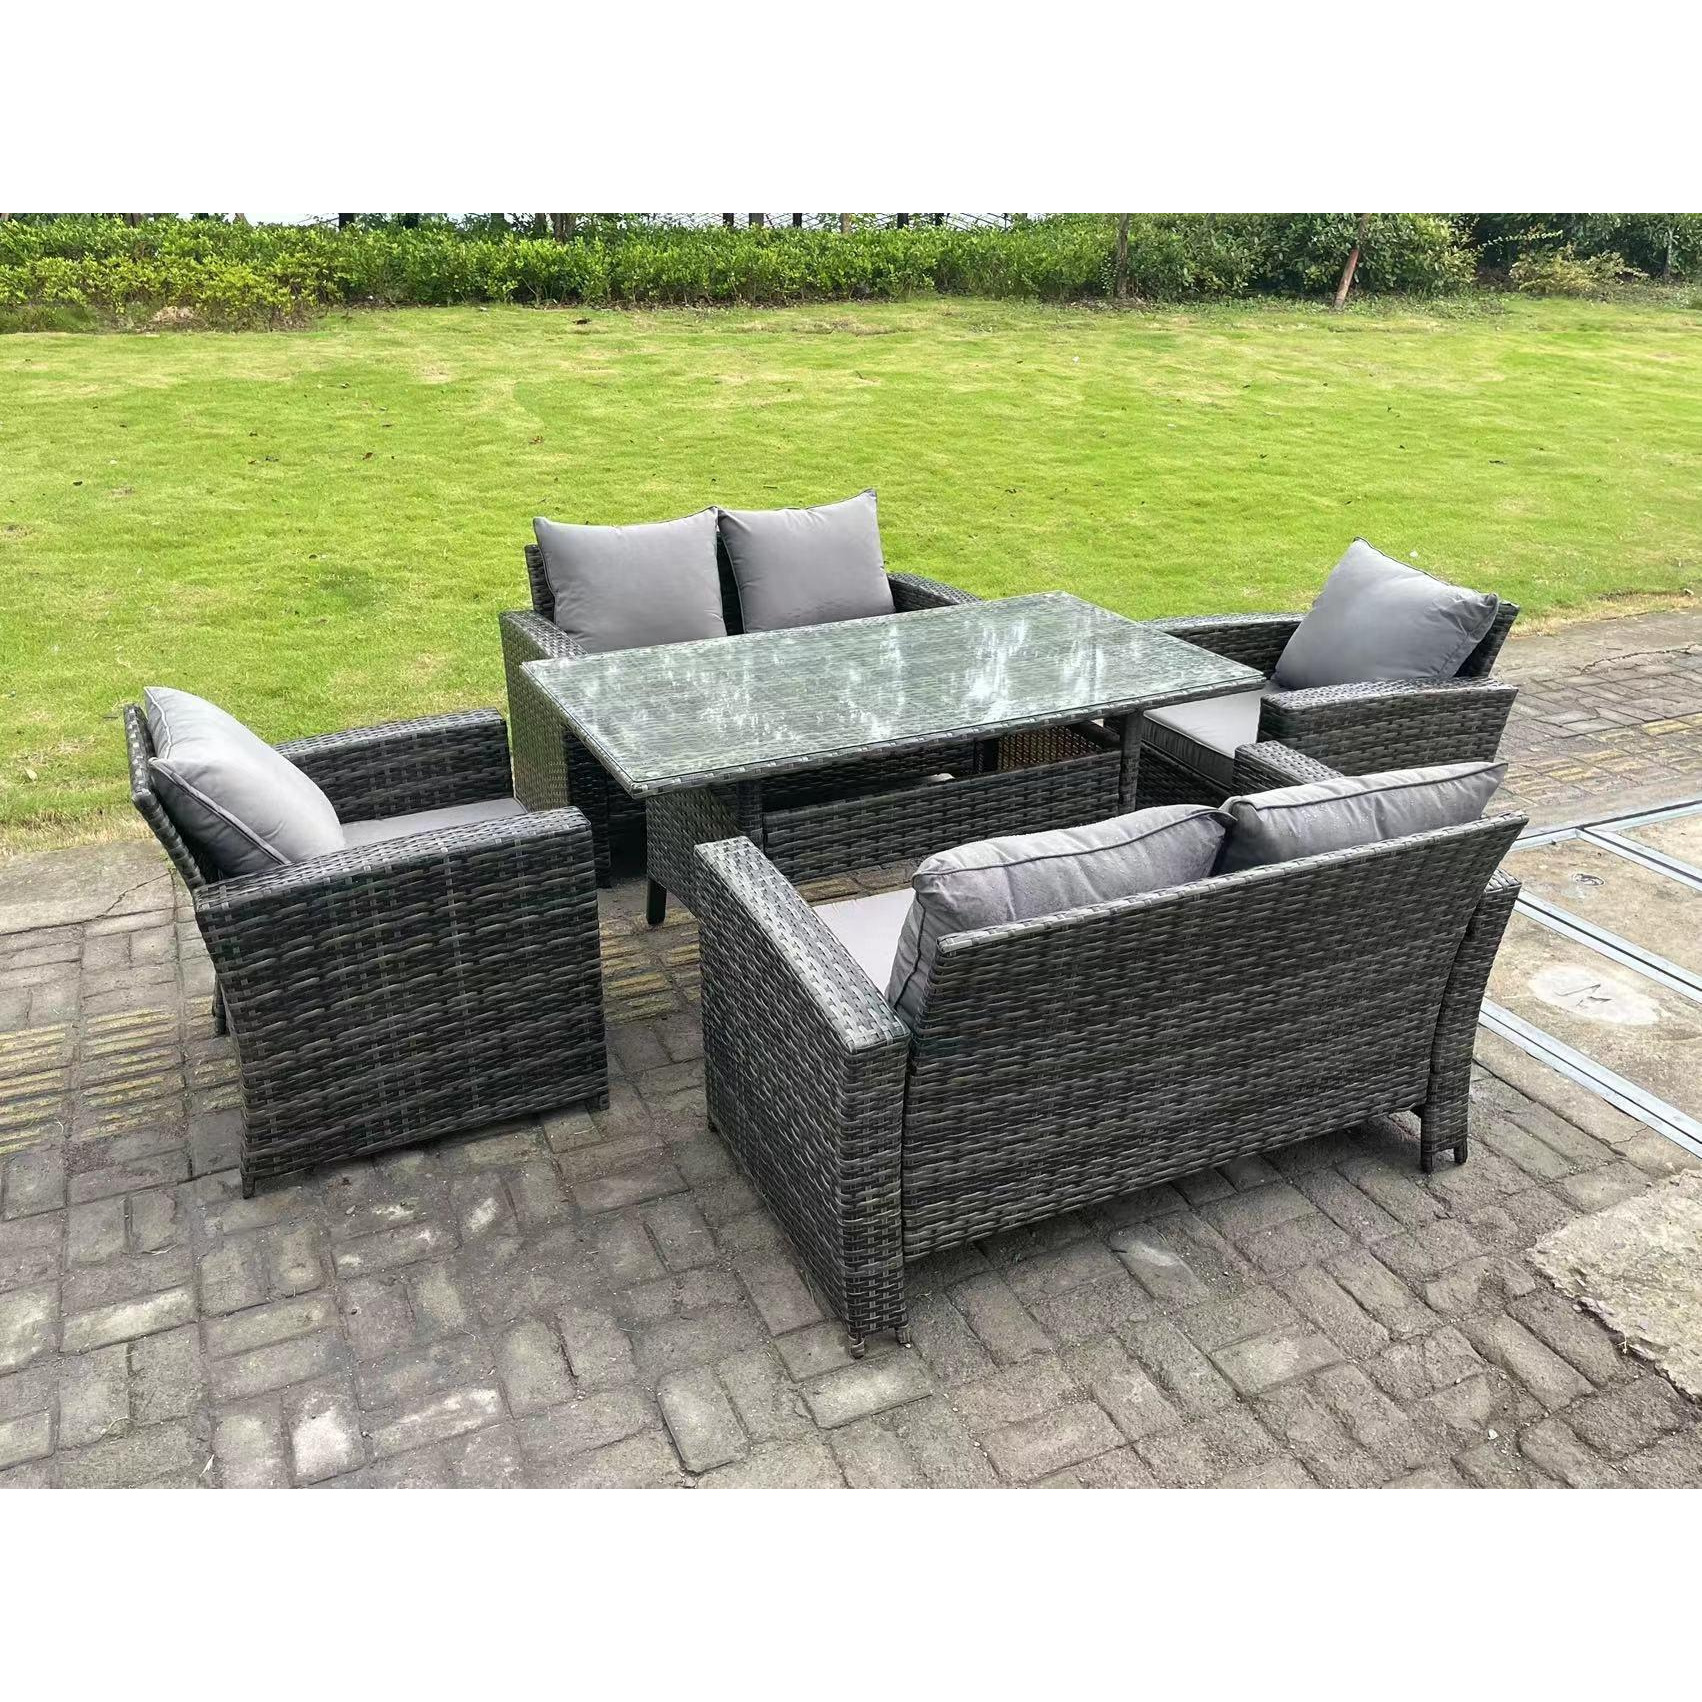 6 Seater Outdoor Dark Grey Mixed High Back Rattan Sofa Dining Table Set Garden Furniture Arm Chairs Love Sofa - image 1